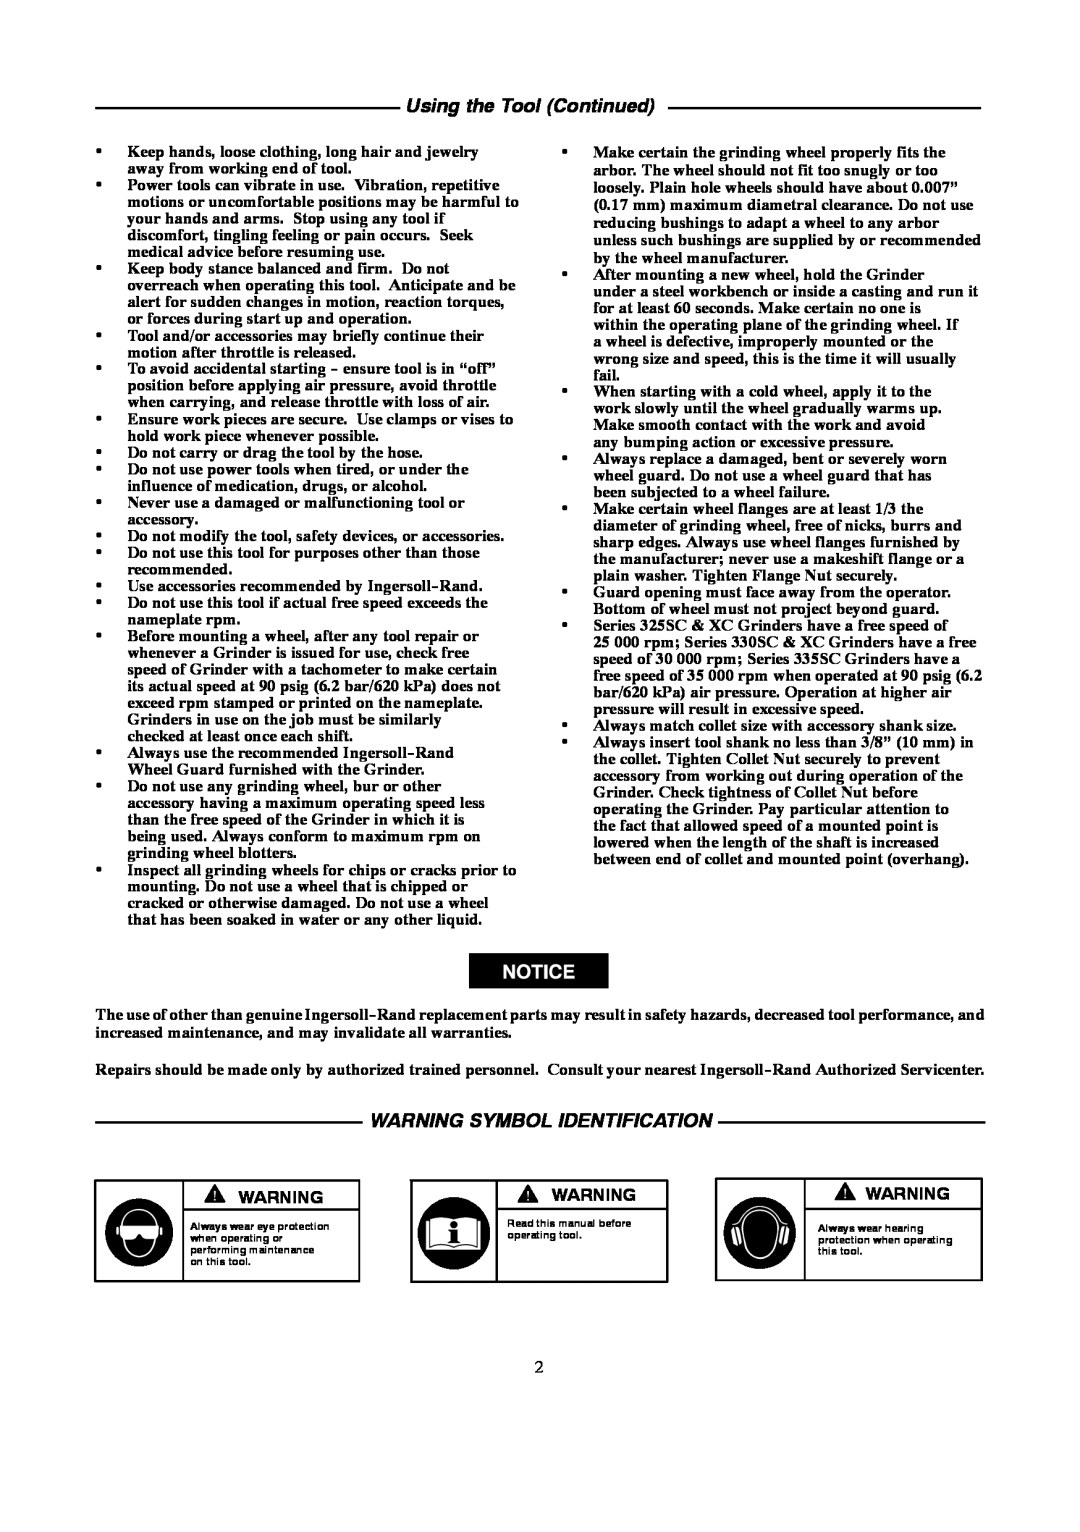 Ingersoll-Rand 4578217 manual Using the Tool Continued, Warning Symbol Identification 